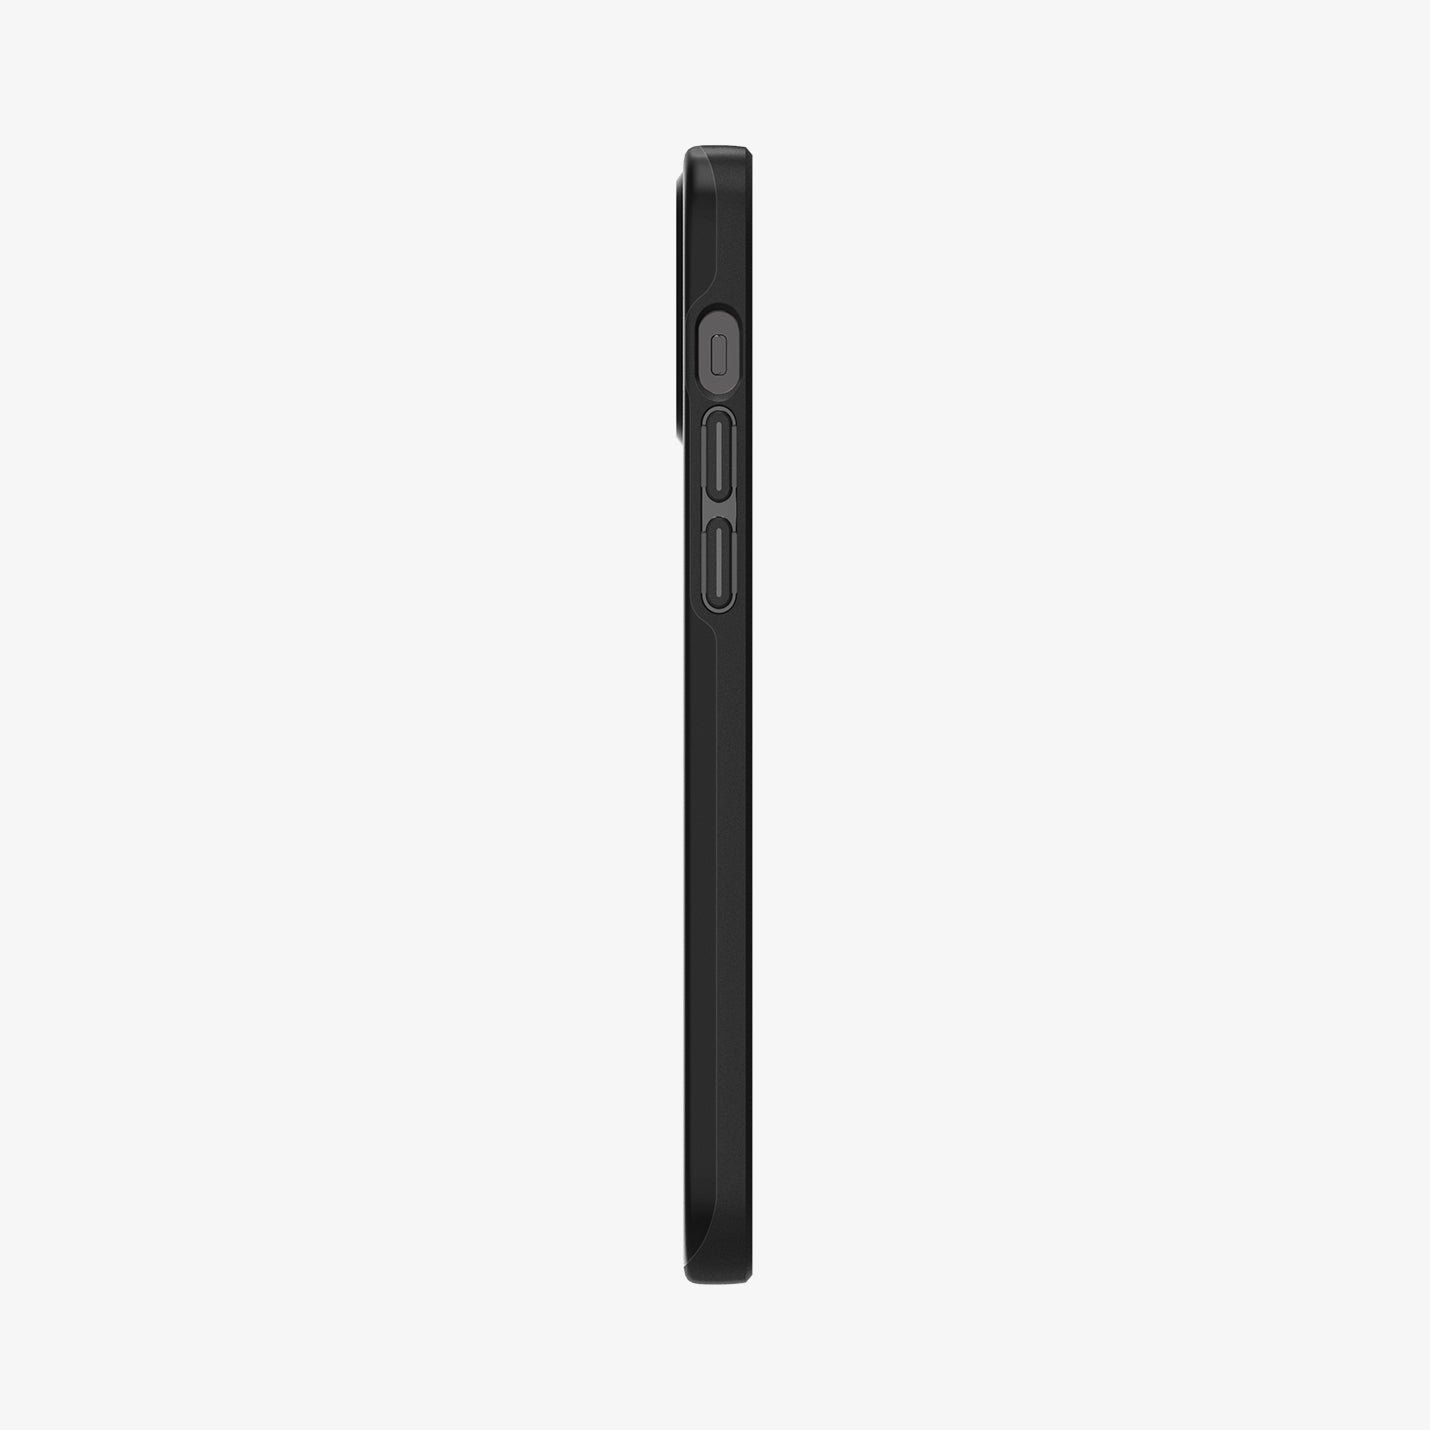 ACS01696 - iPhone 12 / 12 Pro Case Thin Fit in black showing the side with volume controls